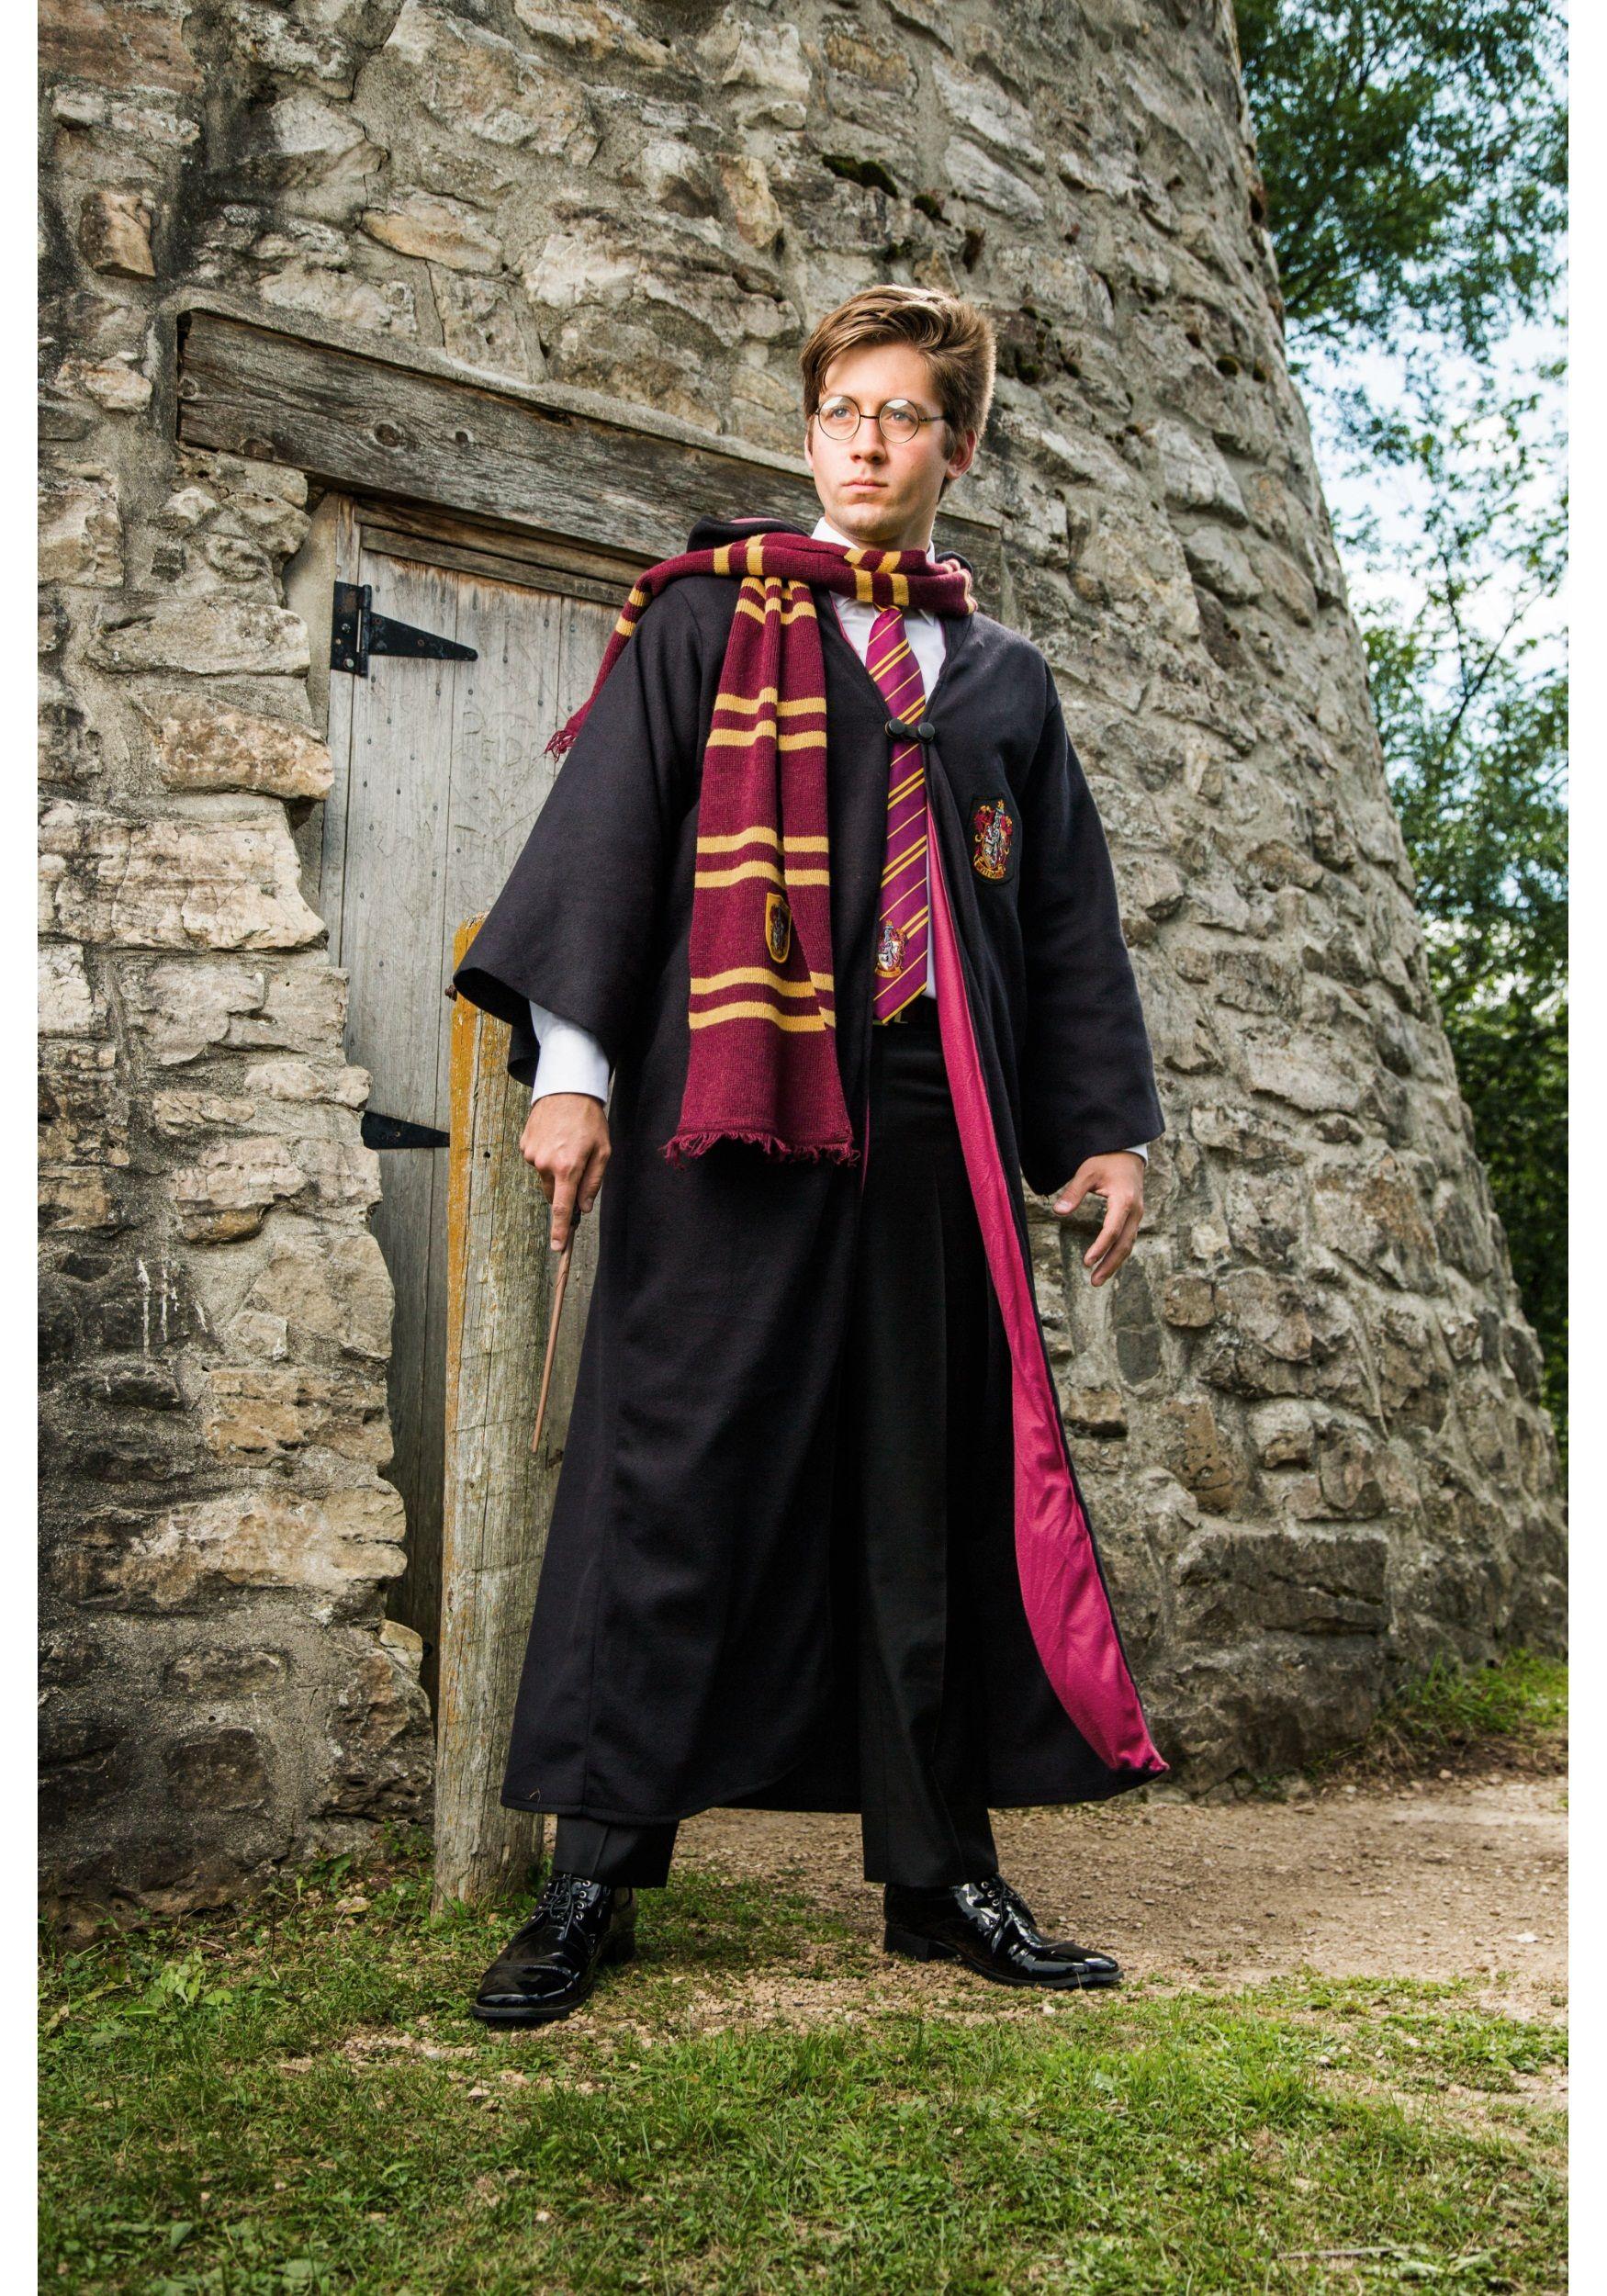 Halloween Costumes Harry Potter. The World's Harry Potter